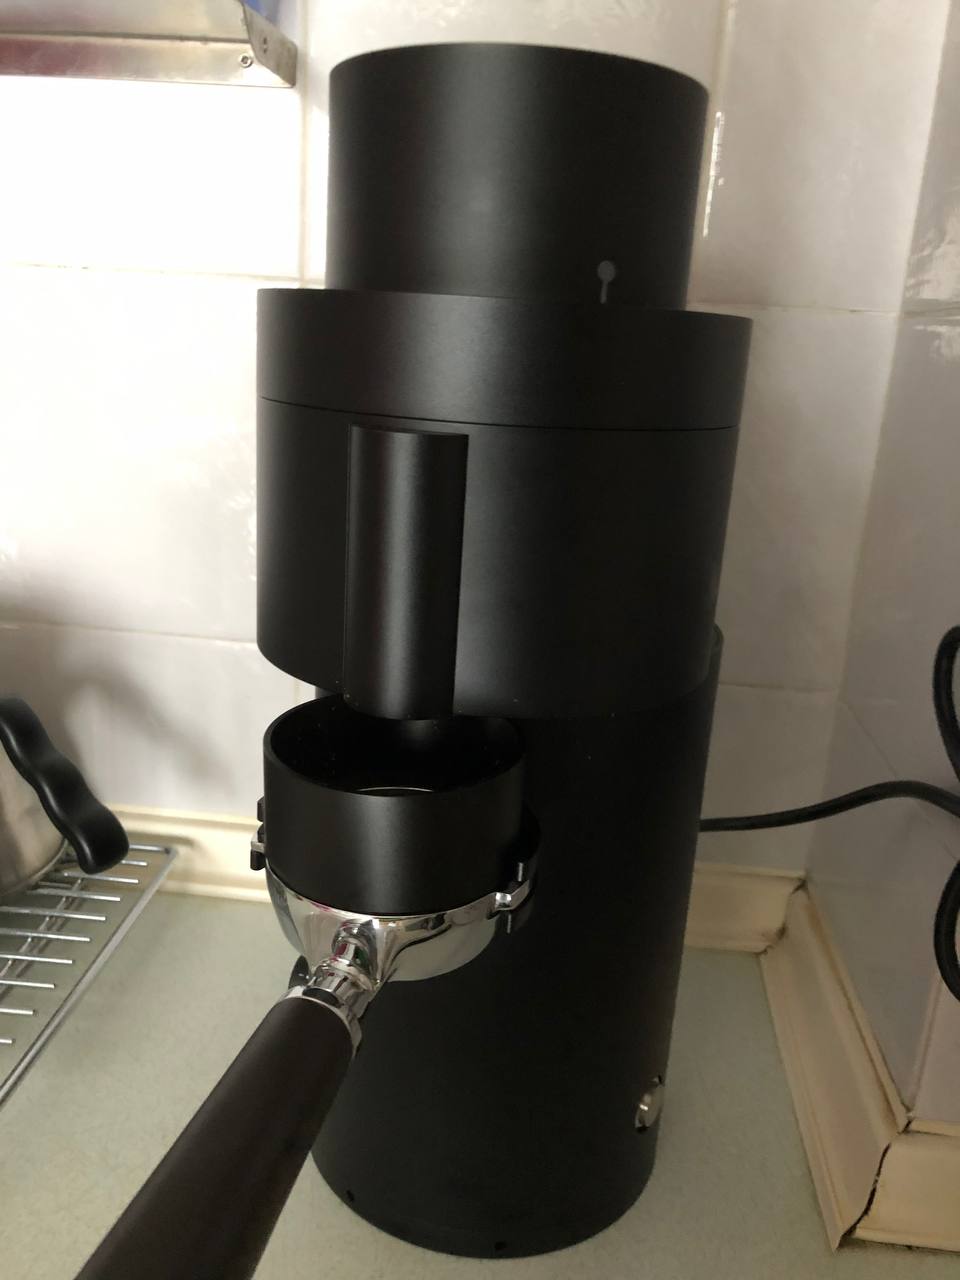 The P100 with an empty portafilter mounted onto the integrated portafilter fork. A dosing funnel placed on top of the portafilter keeps ground coffee from flying out from the gap between the exit chute and the portafilter basket.